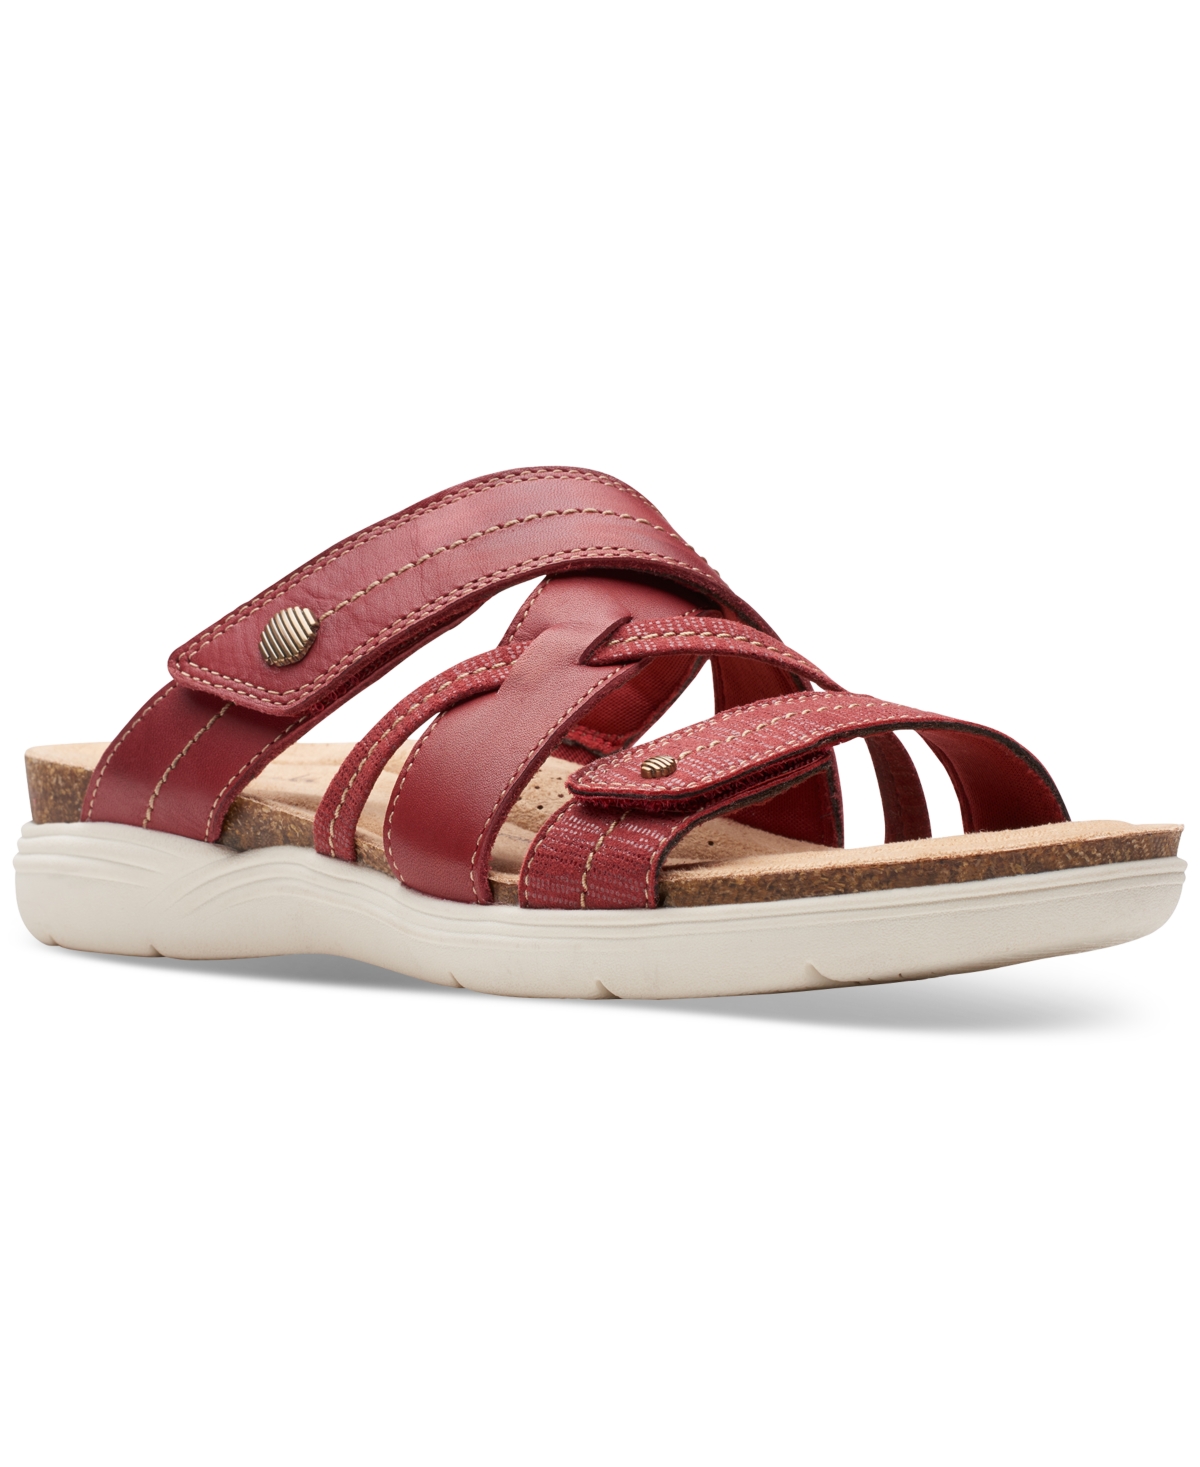 Clarks Women's April Willow Sandals In Red Leathe